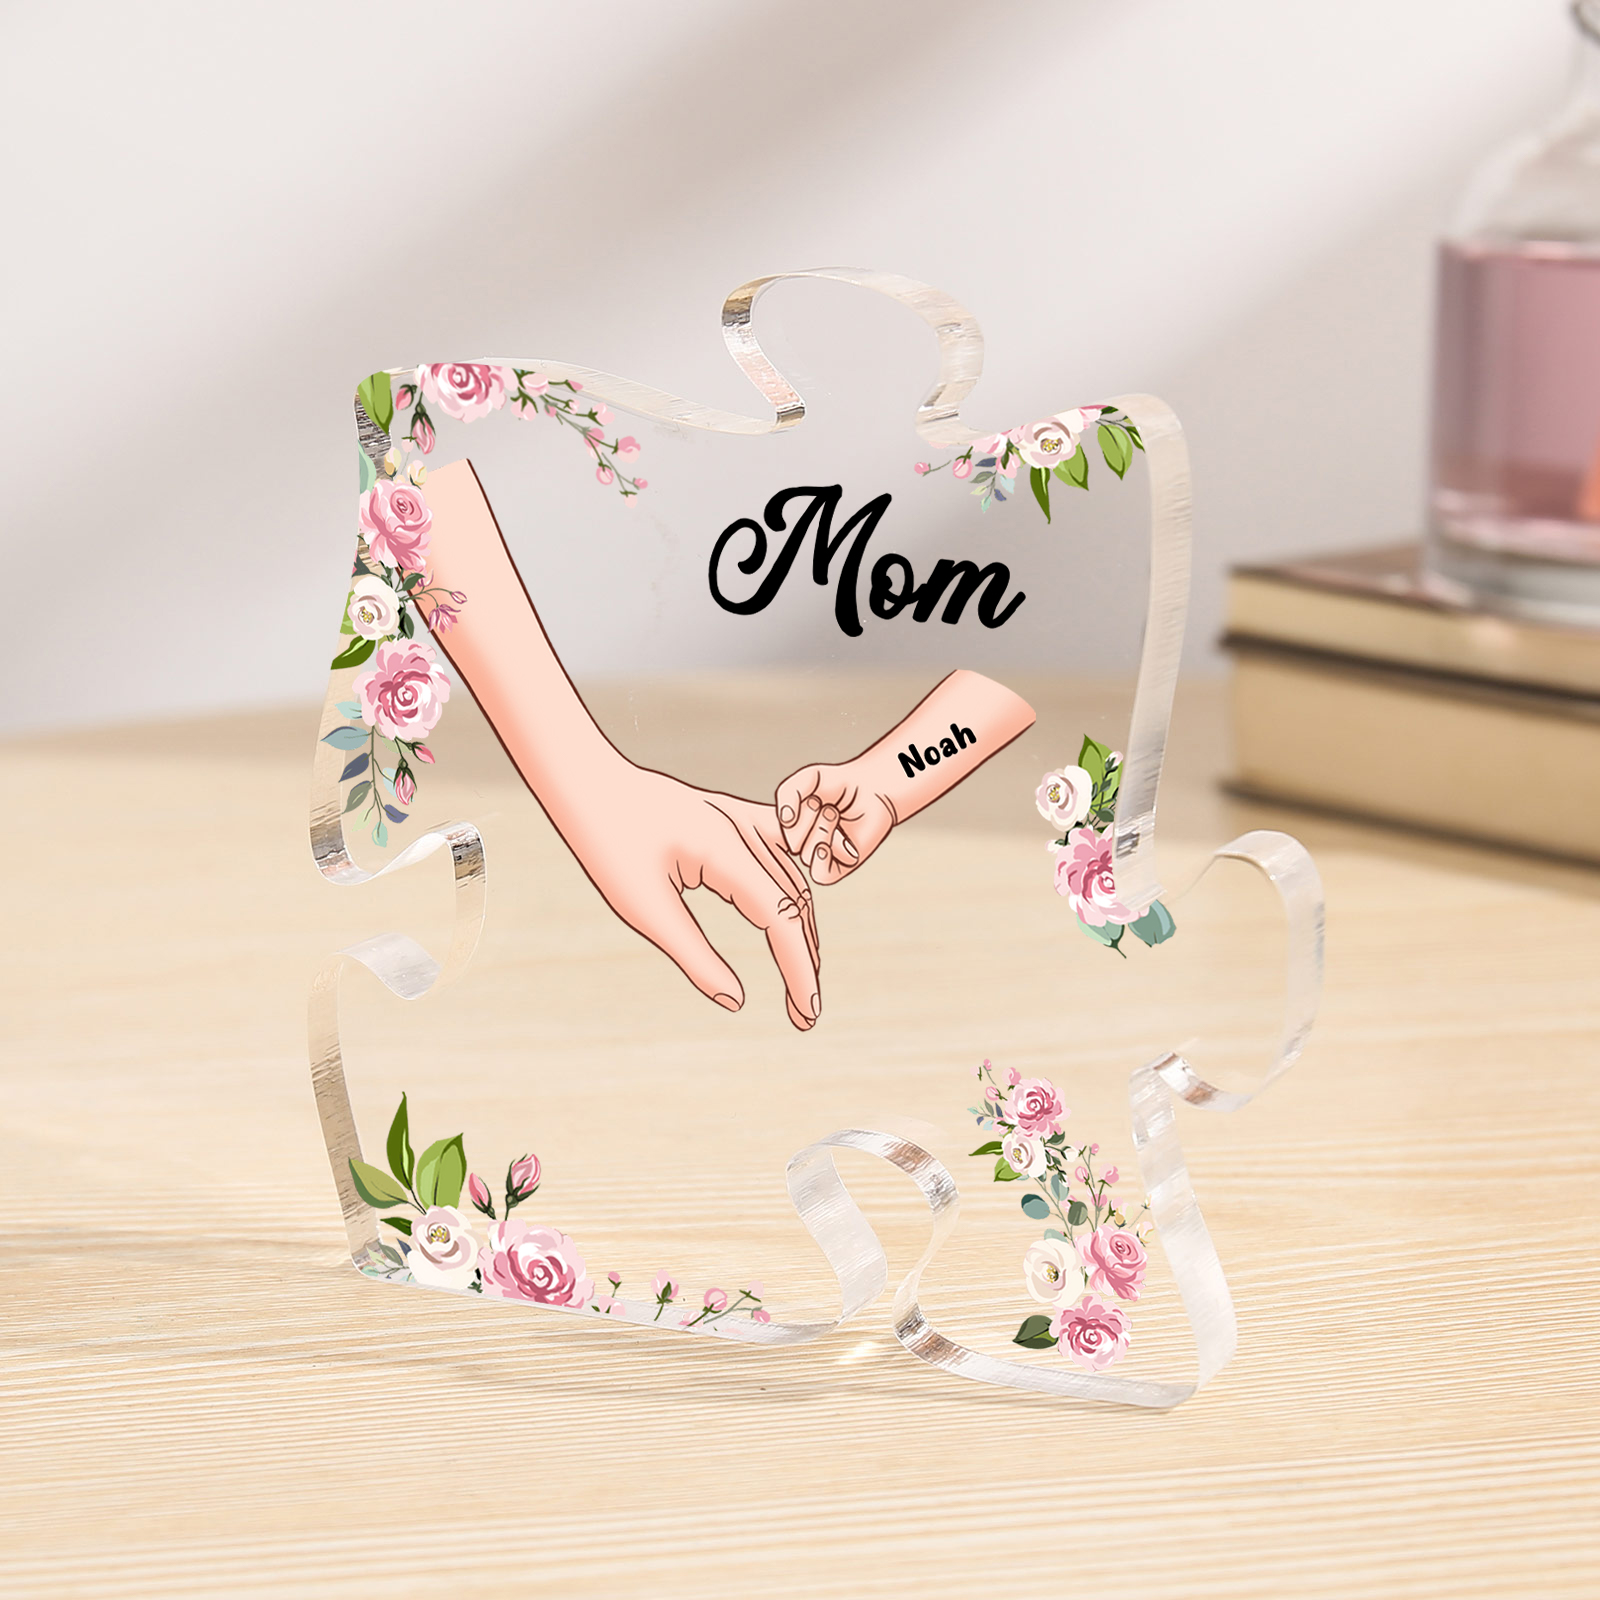 1 Name - Personalized Acrylic Heart Keepsake Customized Name Holding Hands Acrylic Plaque Ornament Mother's Day Gift for Mom